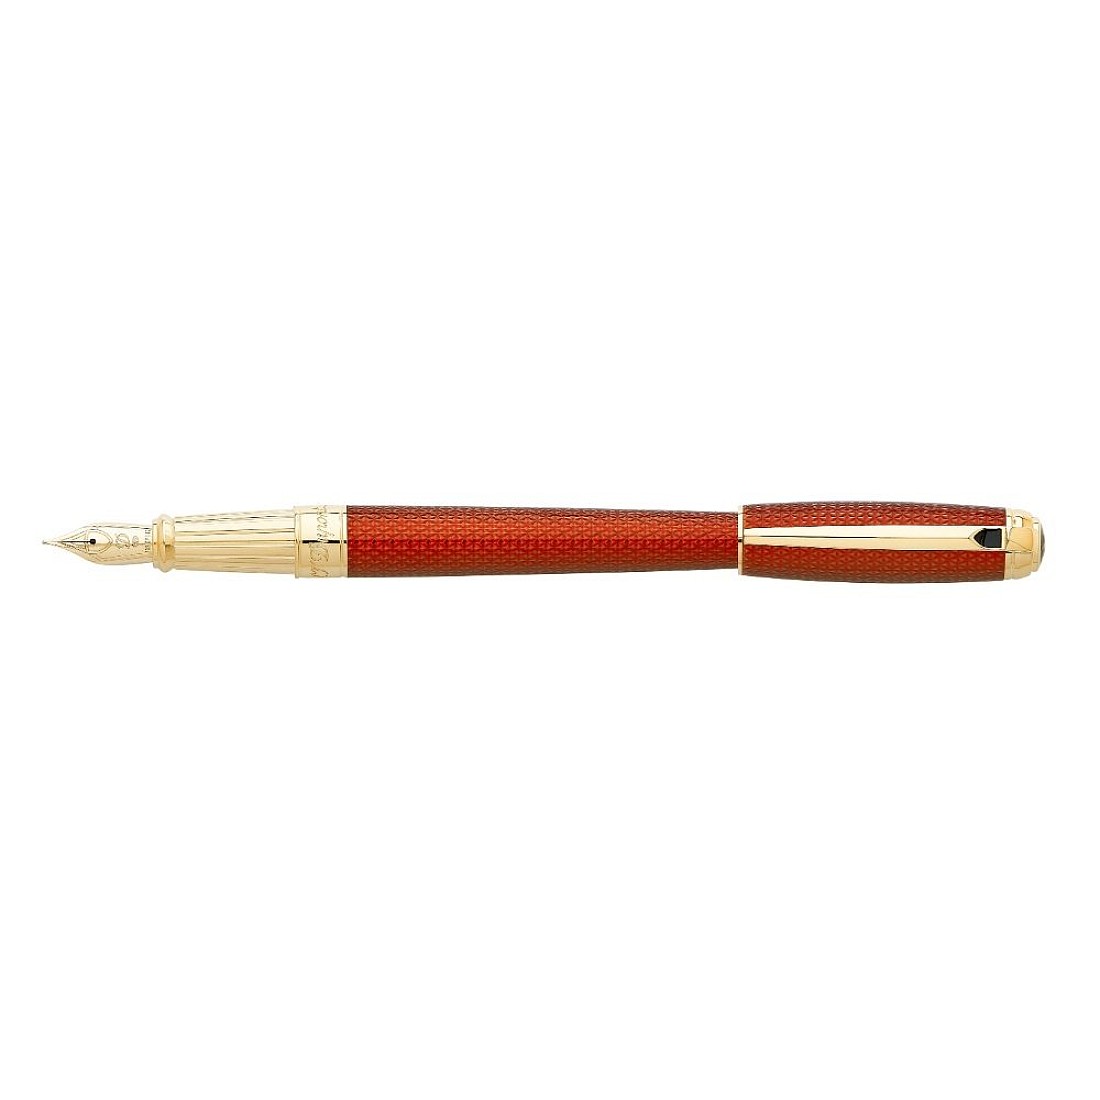 S.T. Dupont Line D Large Firehead Guilloche Amber Fountain pen